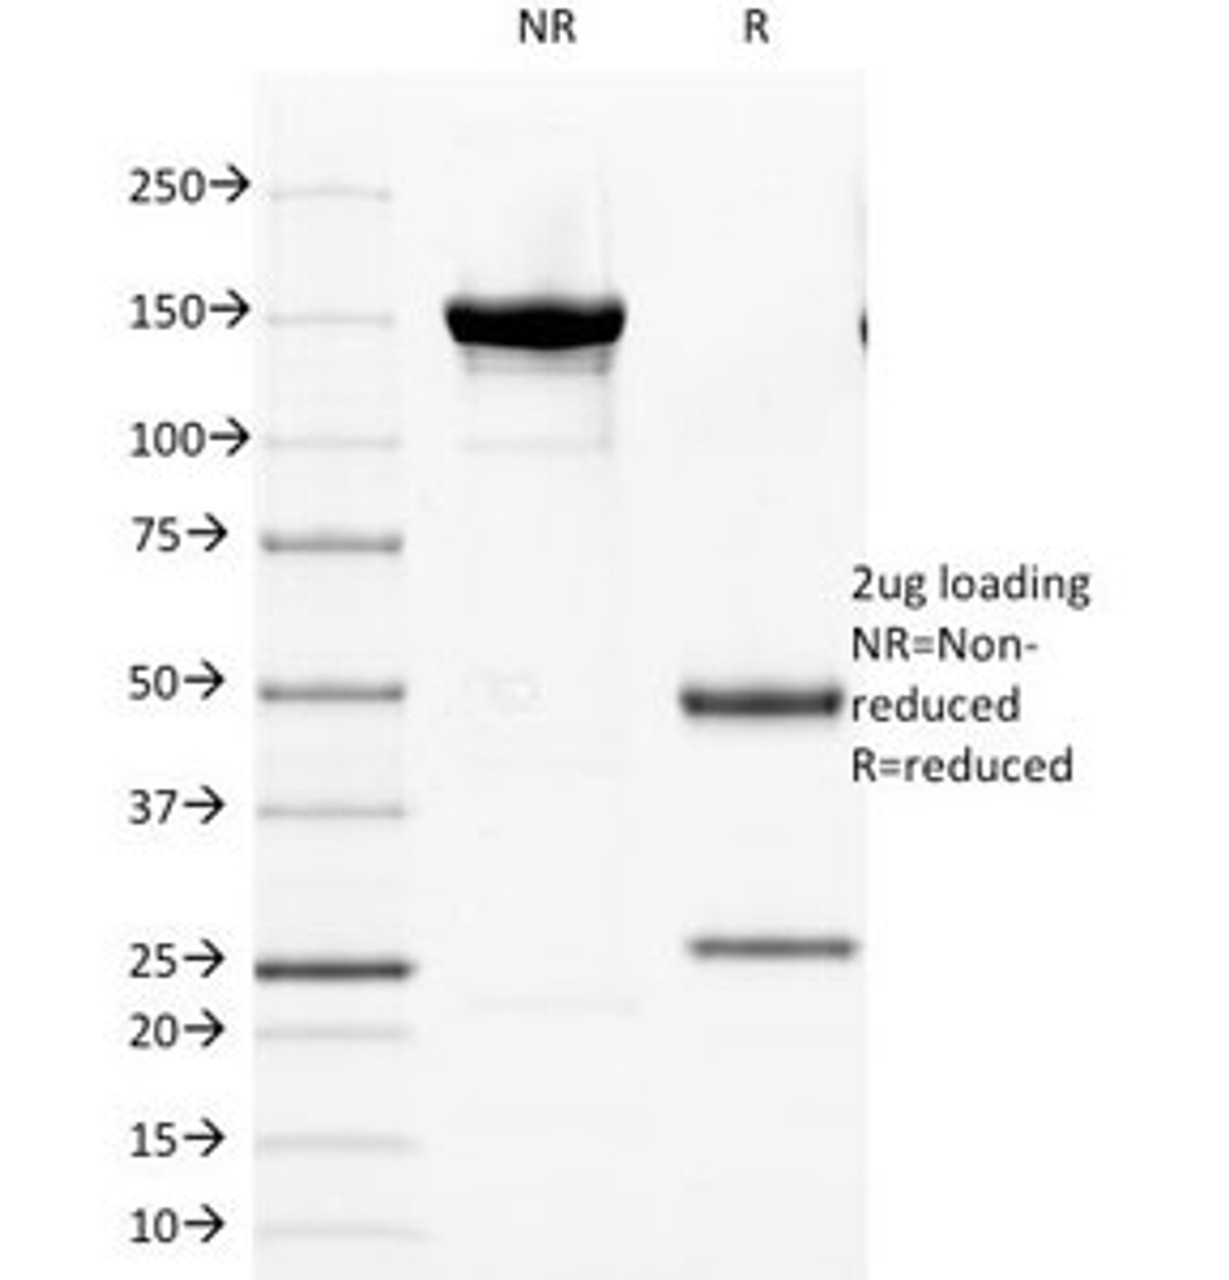 SDS-PAGE Analysis of Purified, BSA-Free Cytokeratin 8 Antibody (clone TS1) . Confirmation of Integrity and Purity of the Antibody.